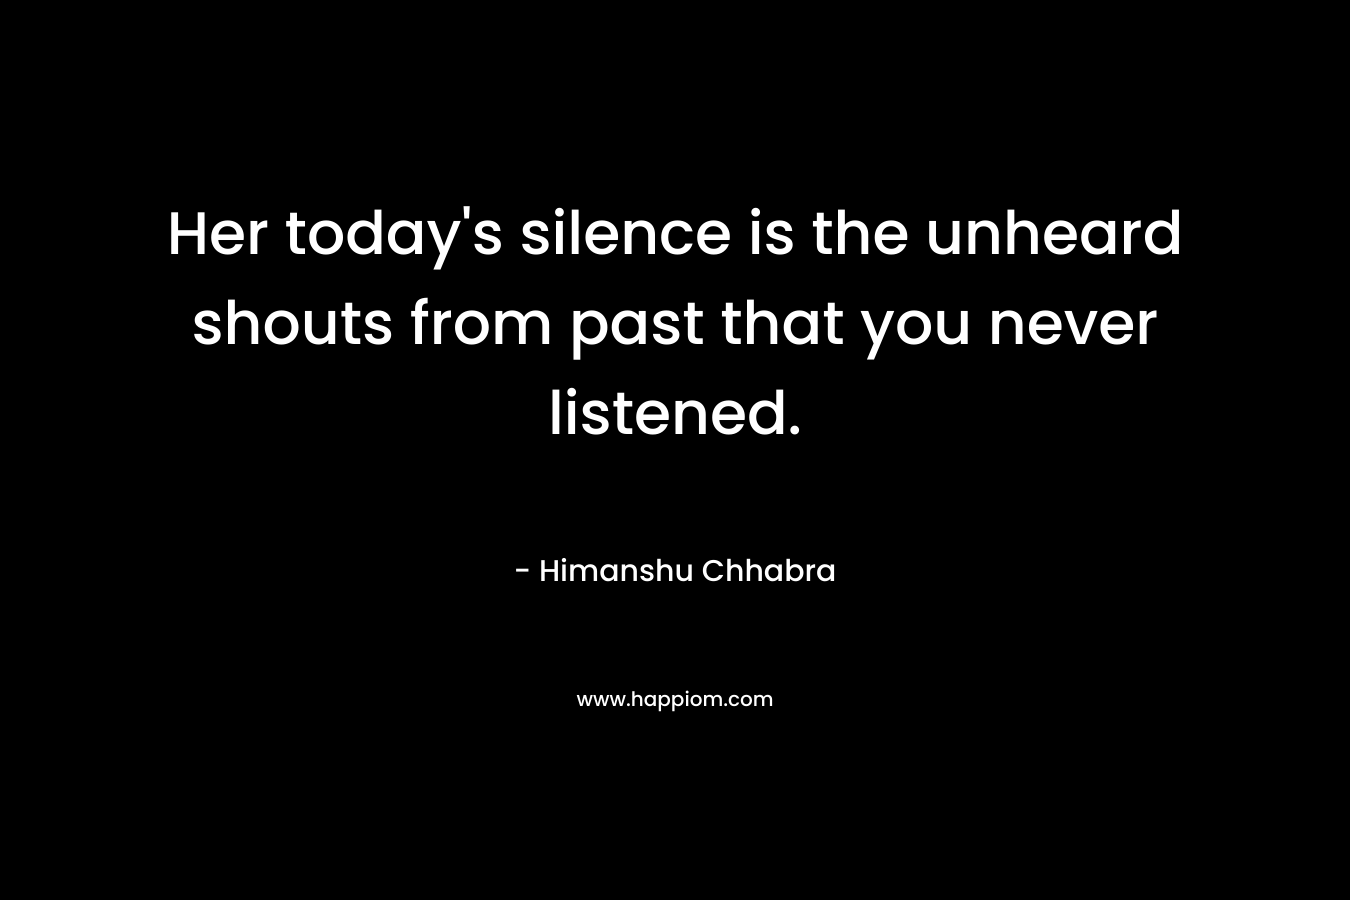 Her today’s silence is the unheard shouts from past that you never listened. – Himanshu Chhabra